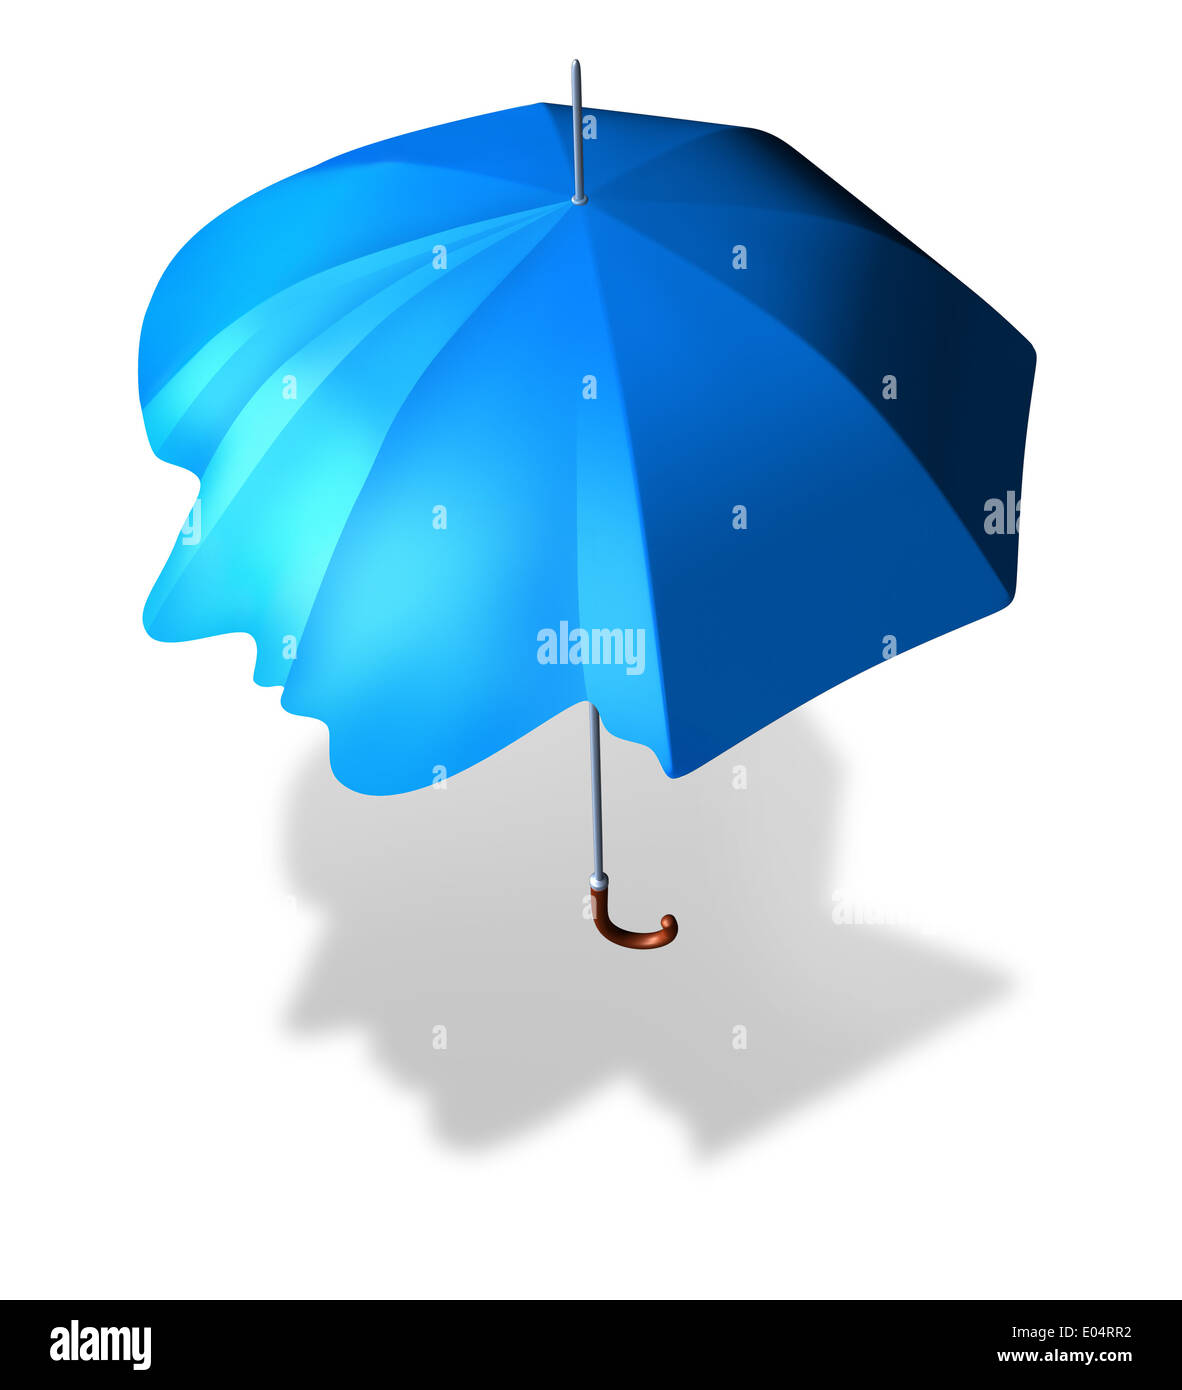 Psychological protection and antisocial personality disorder concept as an umbrella shaped as a human head as a metaphor and medical symbol for living a lonely sheltered life. Stock Photo